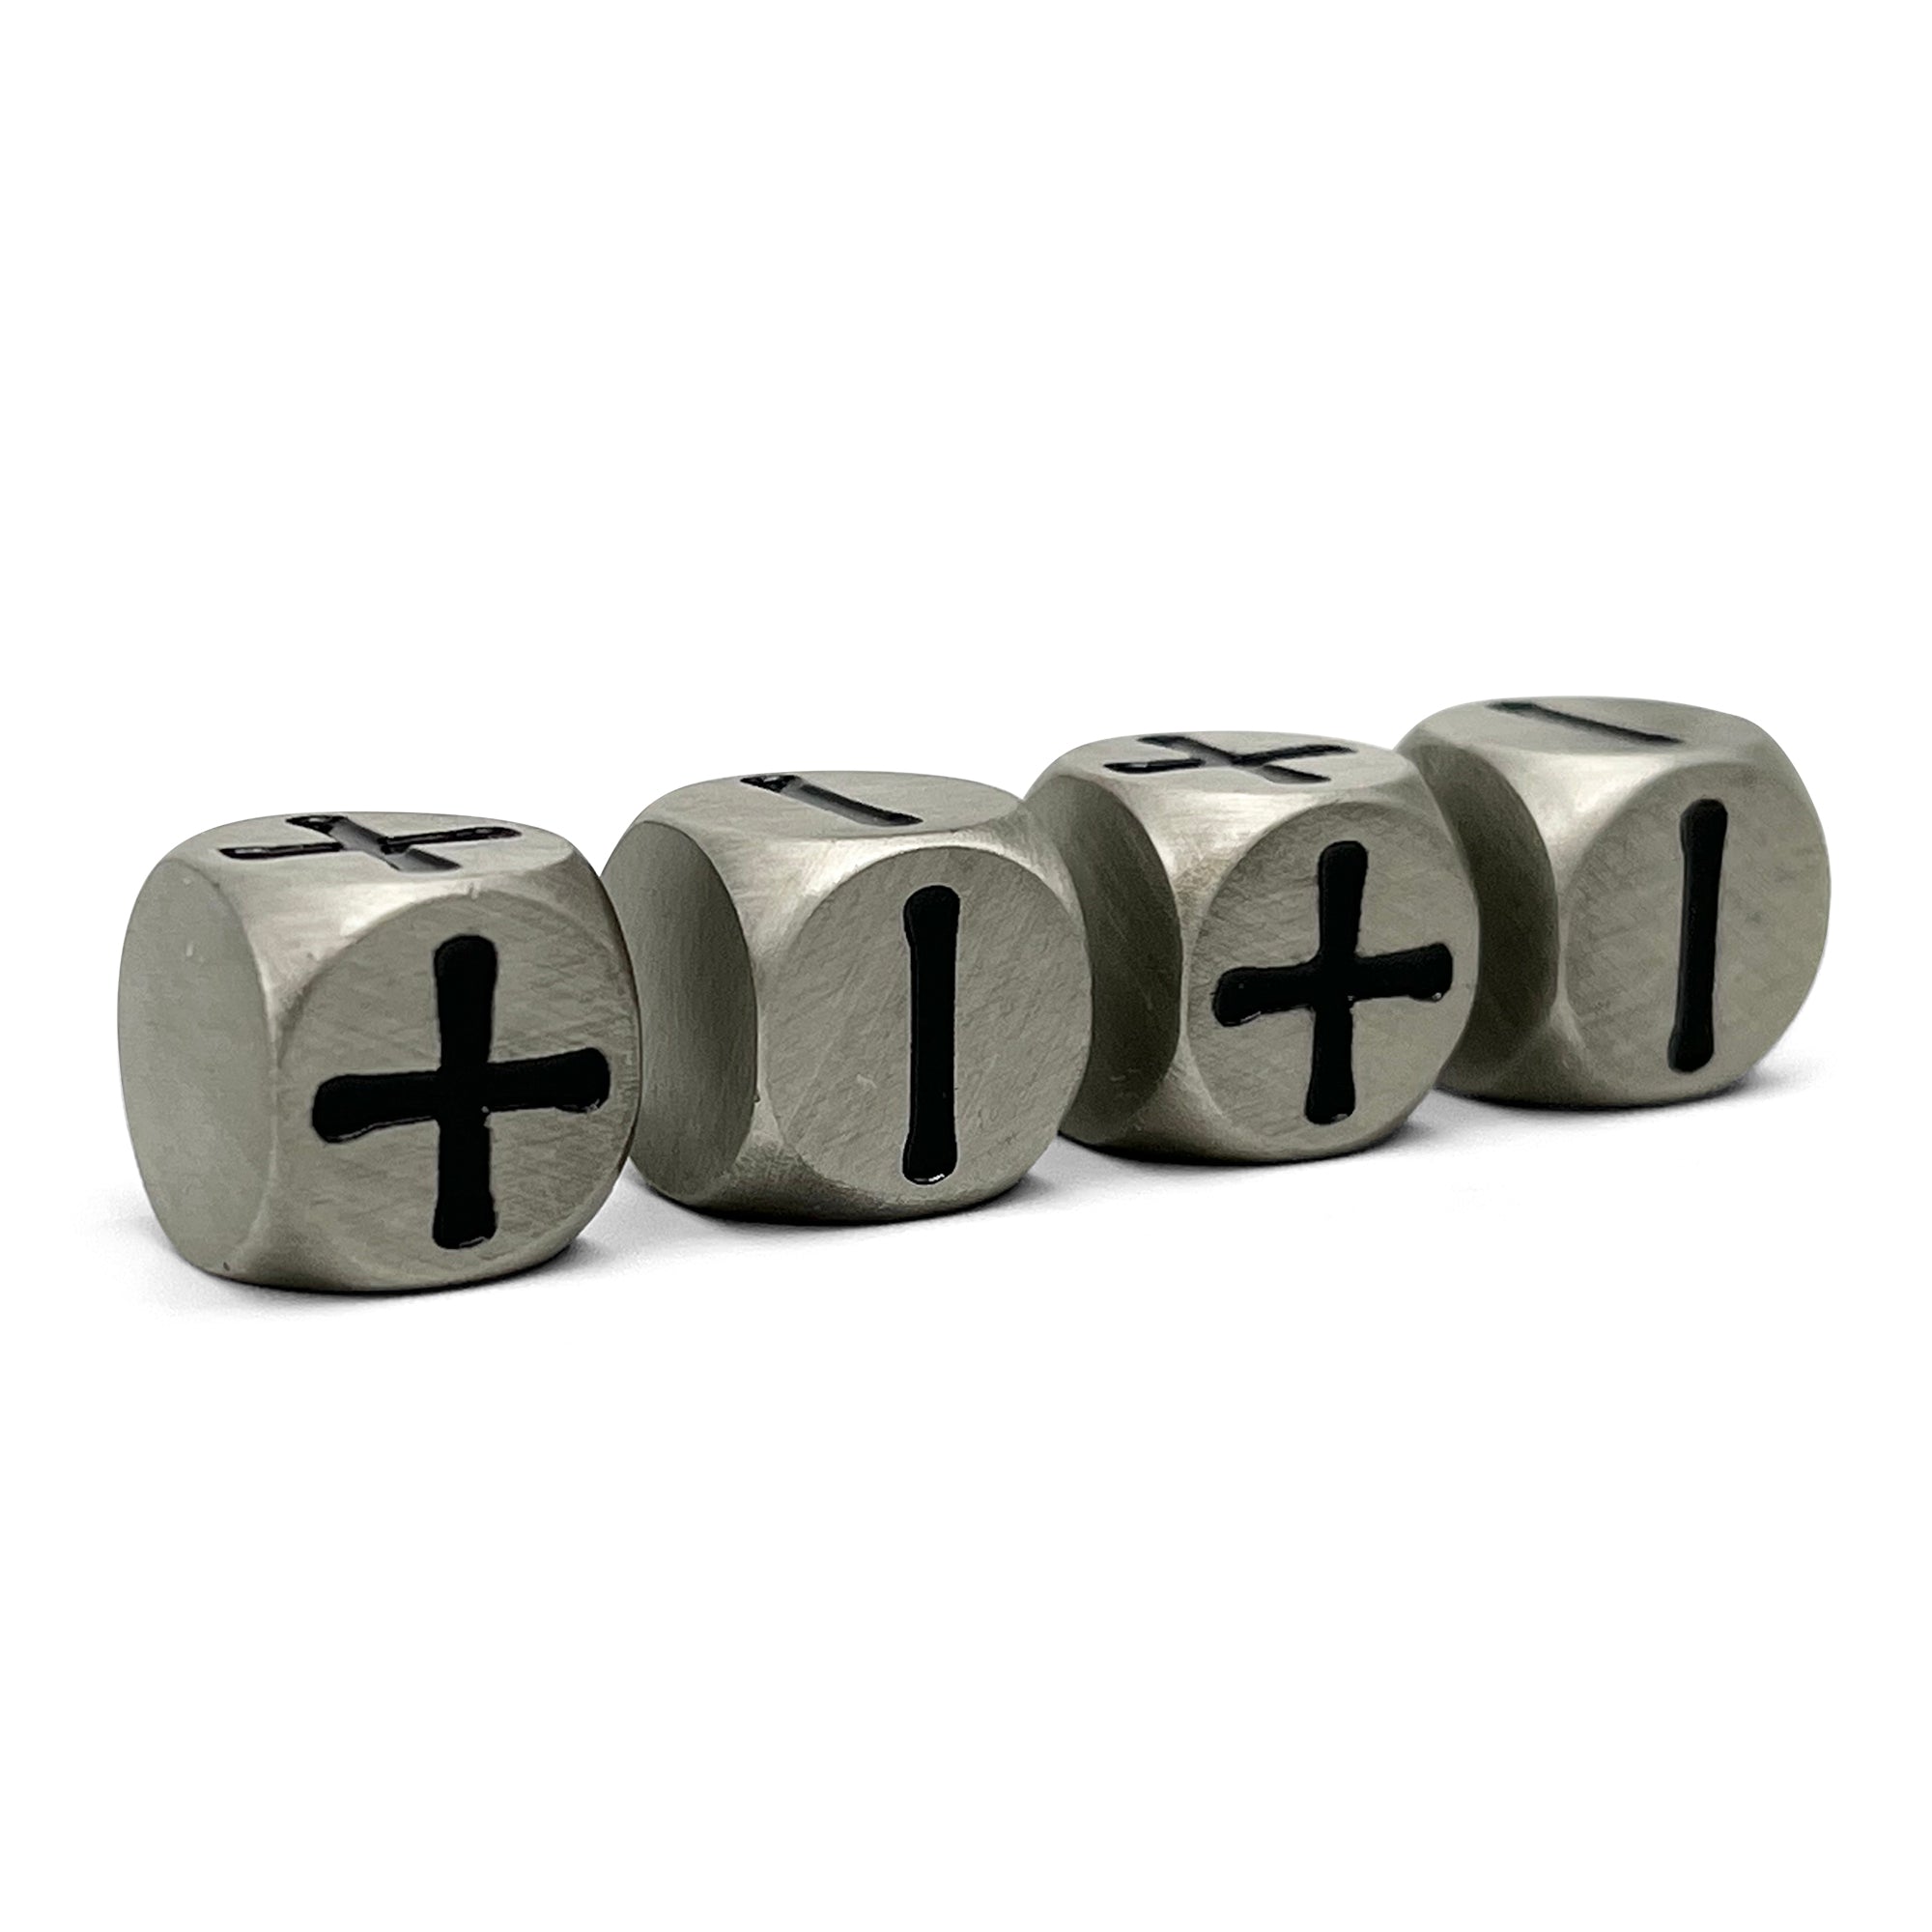 Fate Dice – Aged Mithiral Pack of 4 Metal Dice